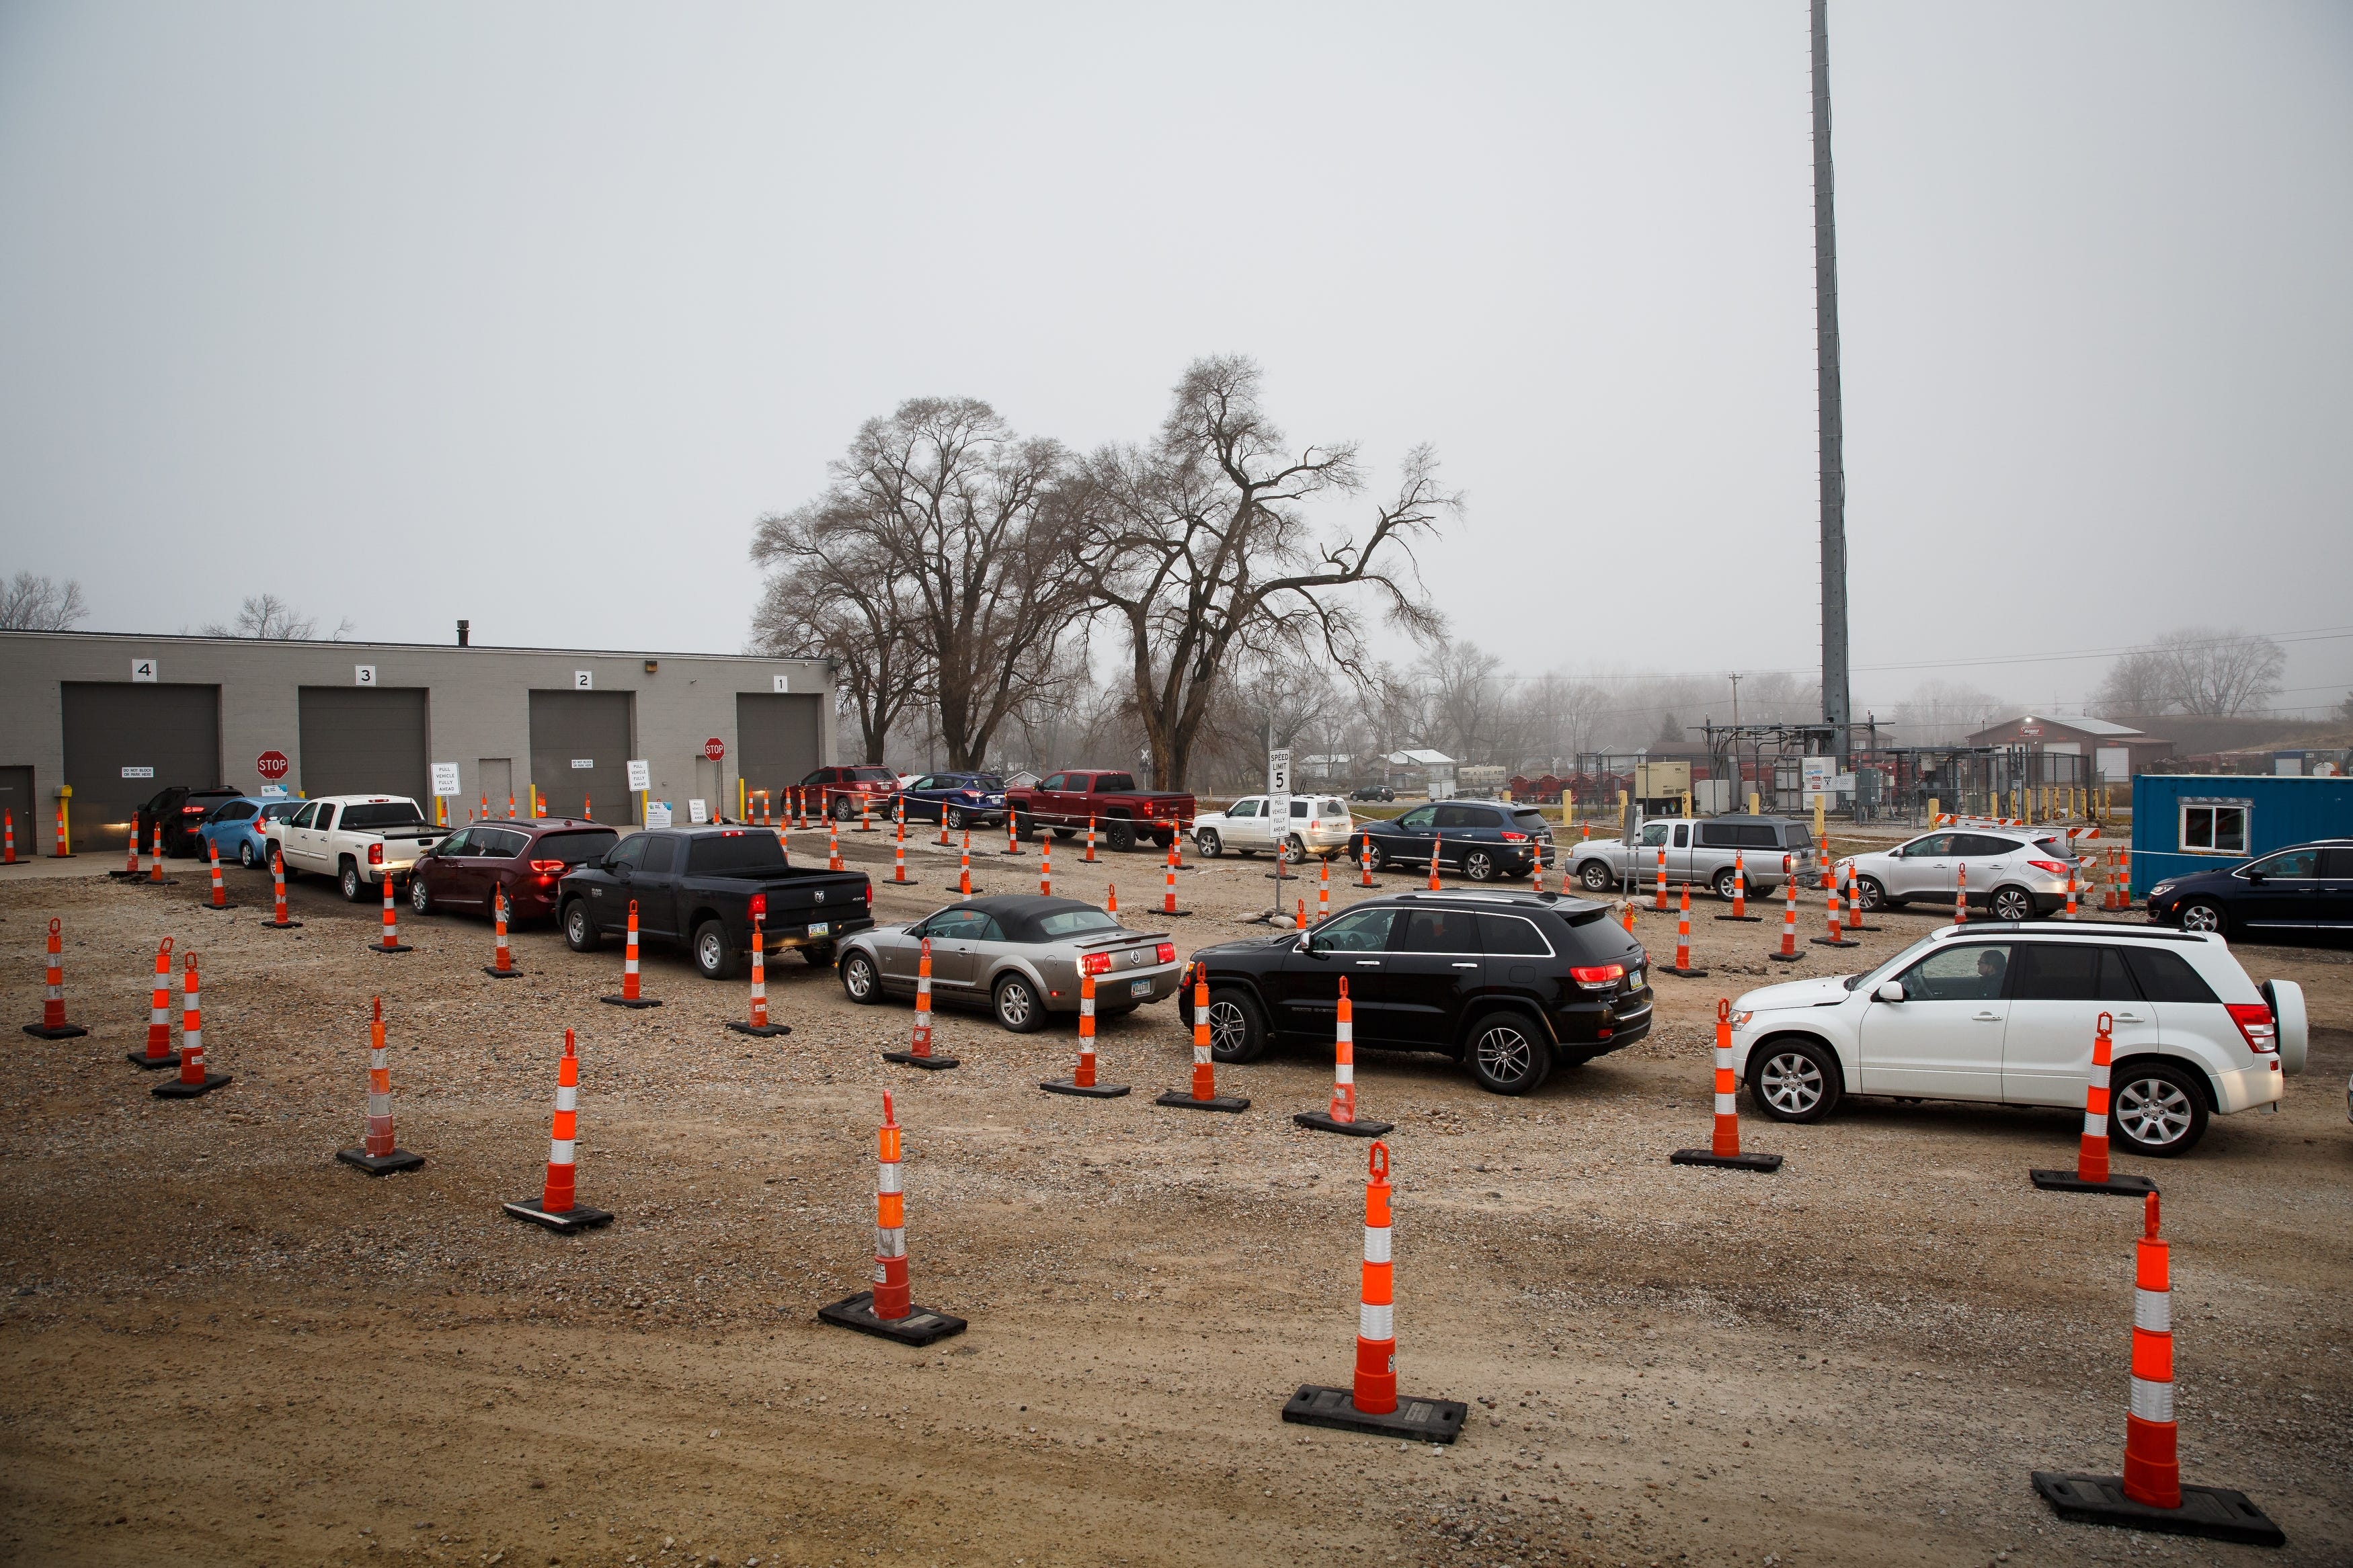 7:53 a.m. DES MOINES- Fog blankets a line of cars waiting for the garage doors to open to the Test Iowa site in Des Moines on Tuesday, Dec. 8, 2020. As cases of COVID-19 spike around the country, lines at the testing sites can stretch out of the pot hole laden gravel lot and onto the road. Extra lanes have been set up to get as many cars into the lot as possible, avoiding backups on the road.